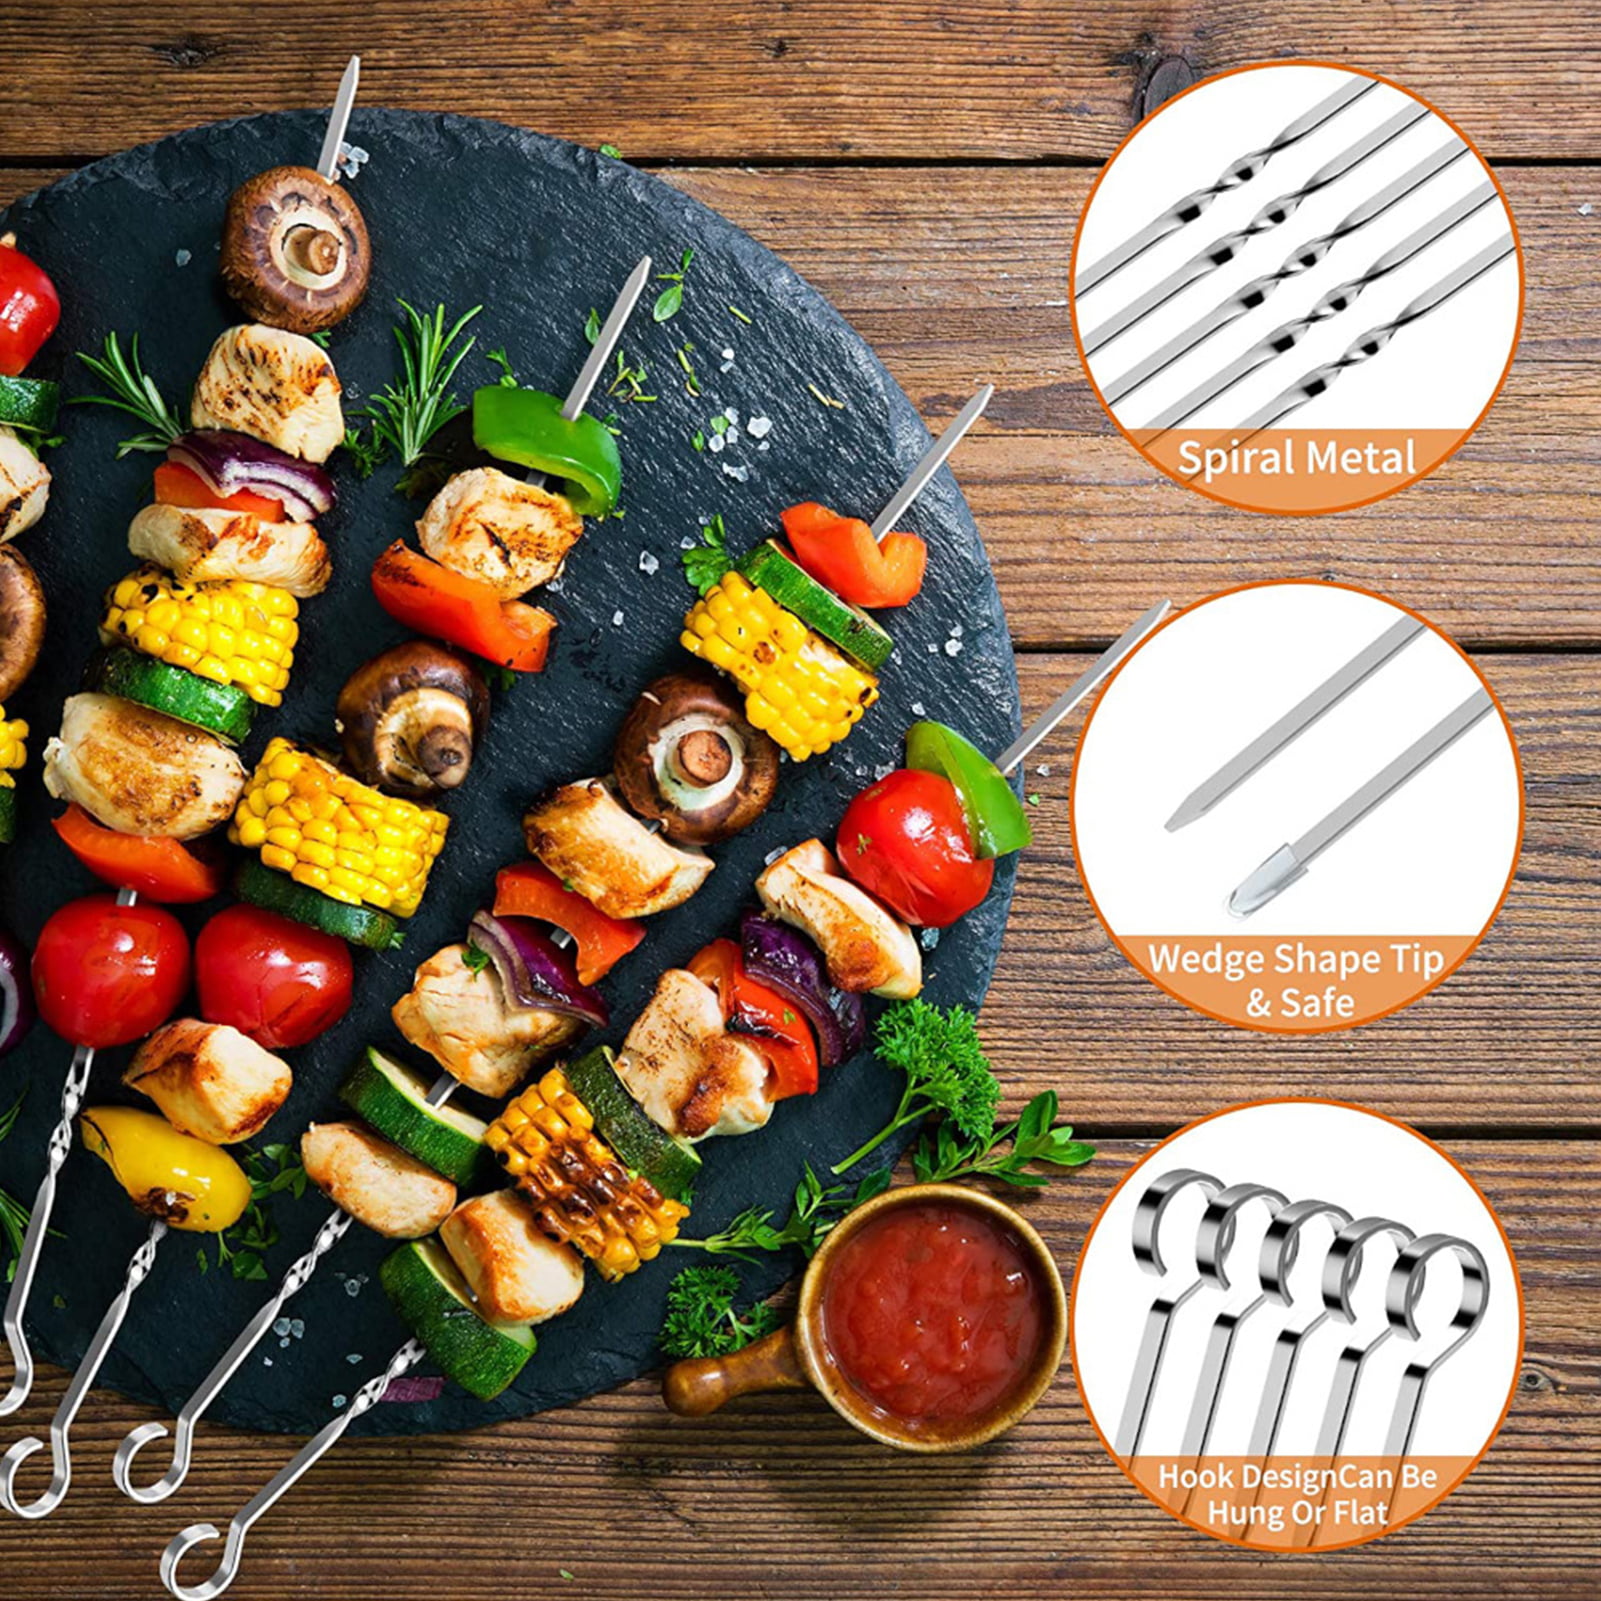 Details about   10Pcs BBQ Stainless Steel Barbeque Shish Skewers Kebab Flat Long Grill Sticks US 